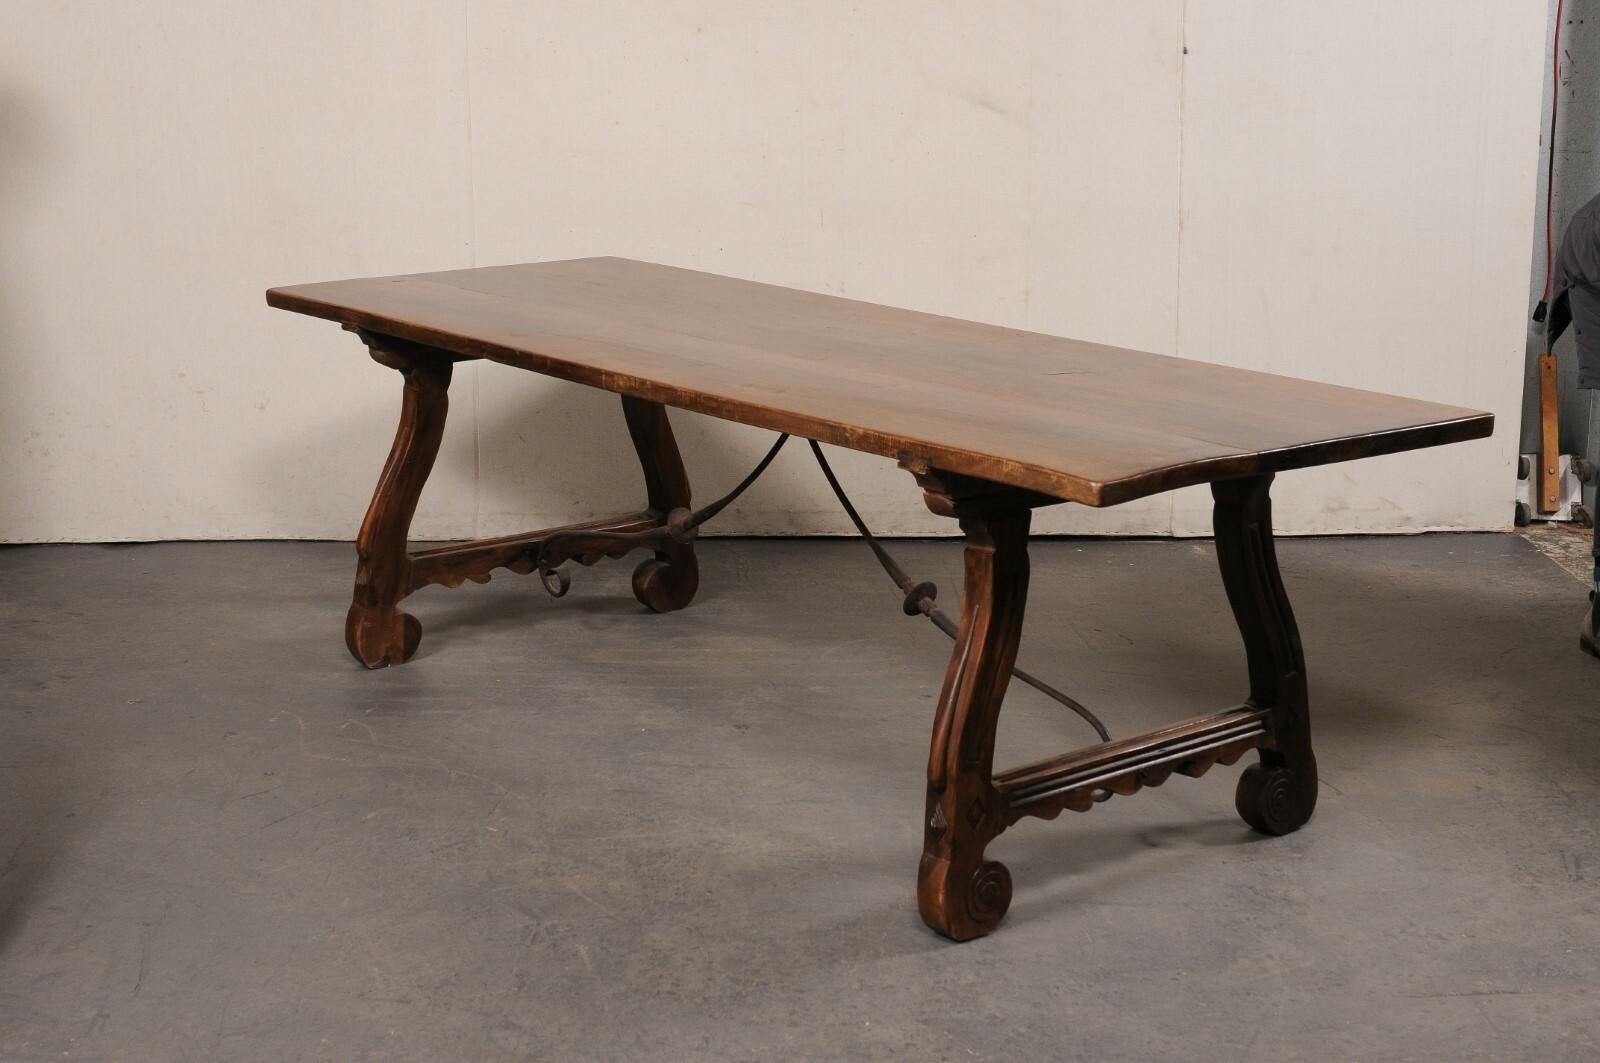 20th Century Spanish Carved Walnut Wood Trestle-Leg Table w/Forged Iron Stretcher, 8+ Ft Long For Sale